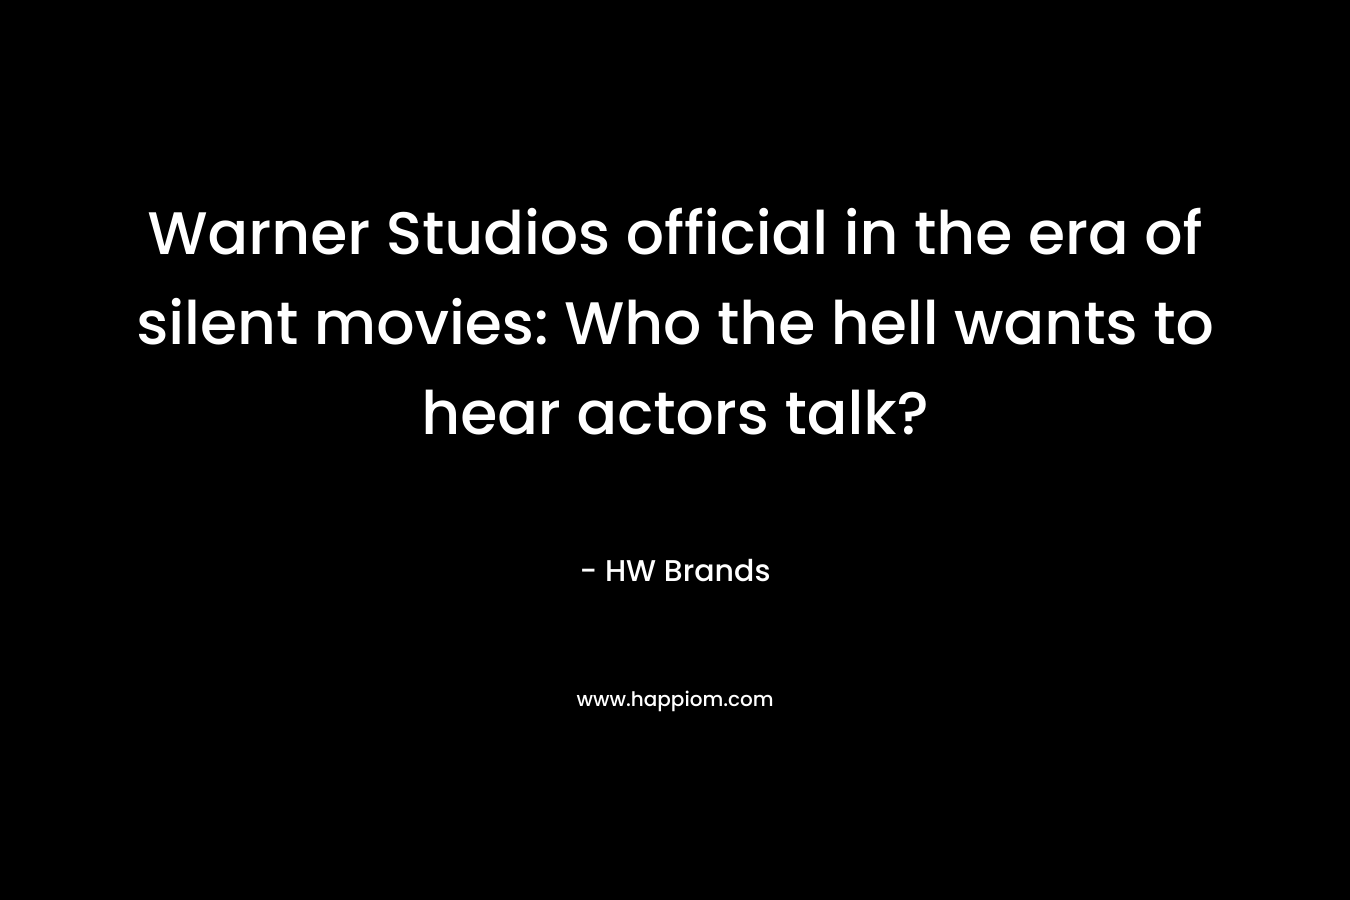 Warner Studios official in the era of silent movies: Who the hell wants to hear actors talk?